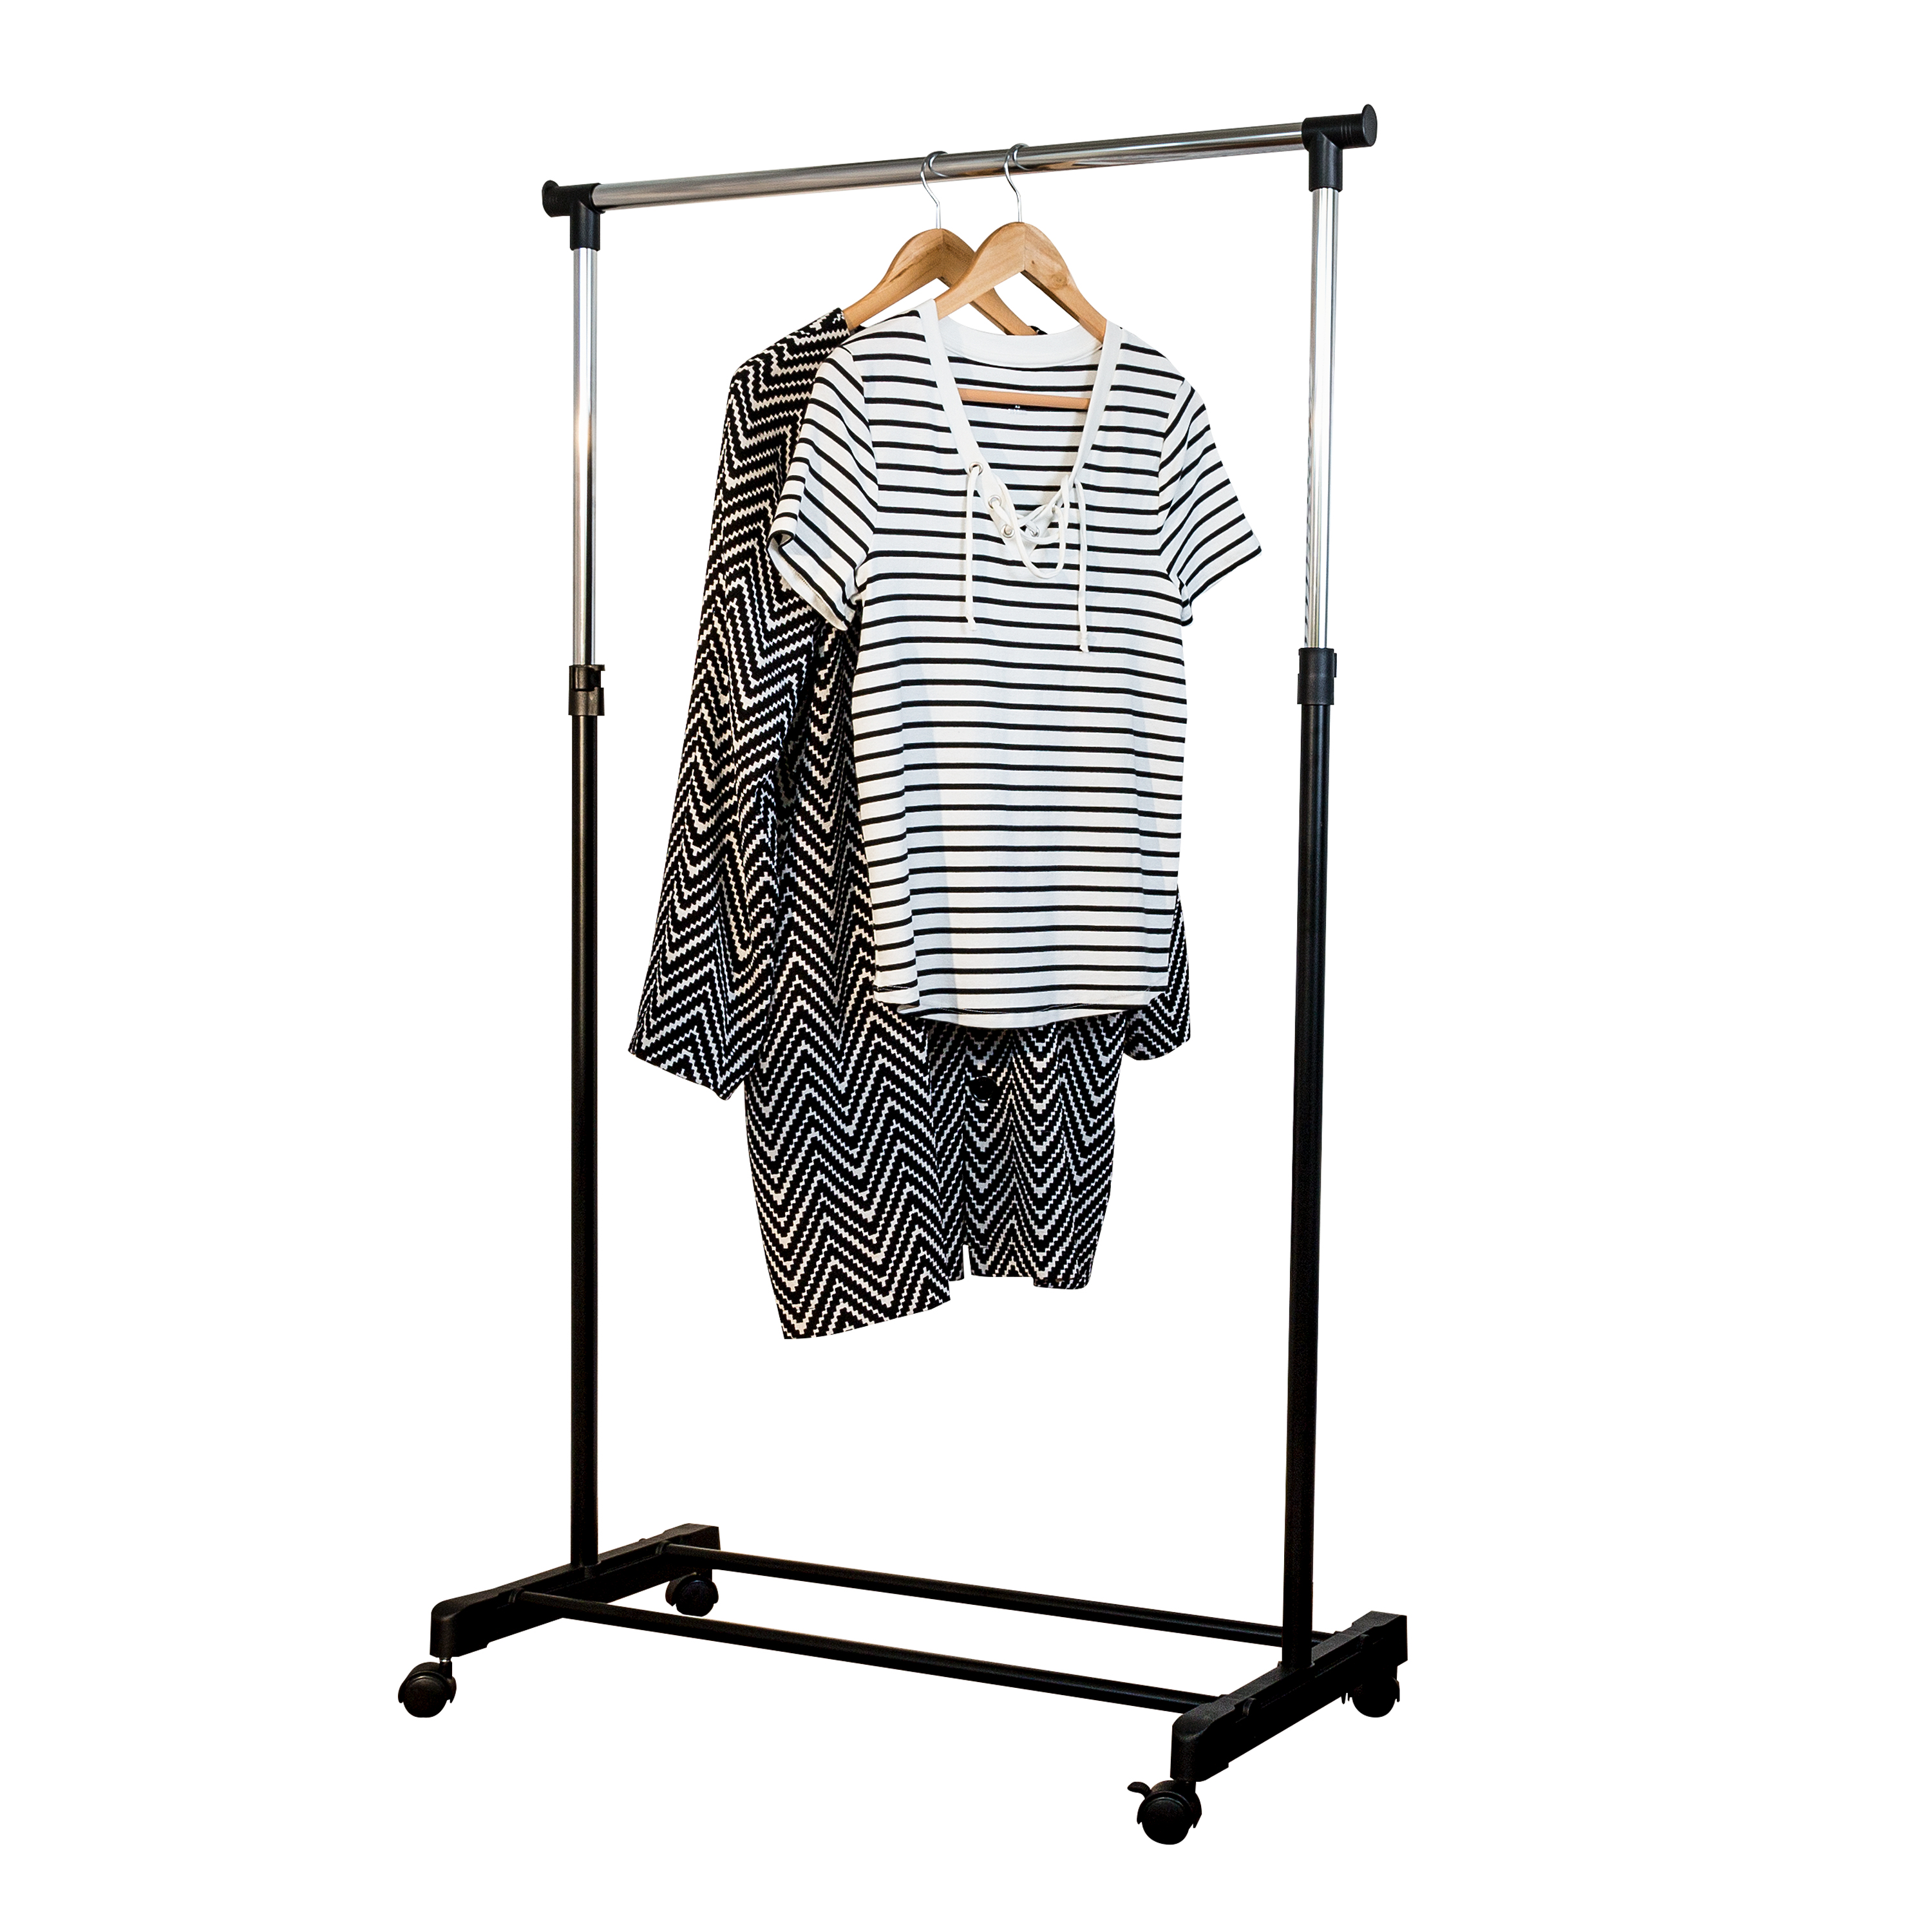 Honey-Can-Do Steel Single Rod Adjustable Height Rolling Clothes Rack, Chrome/Black - image 4 of 6